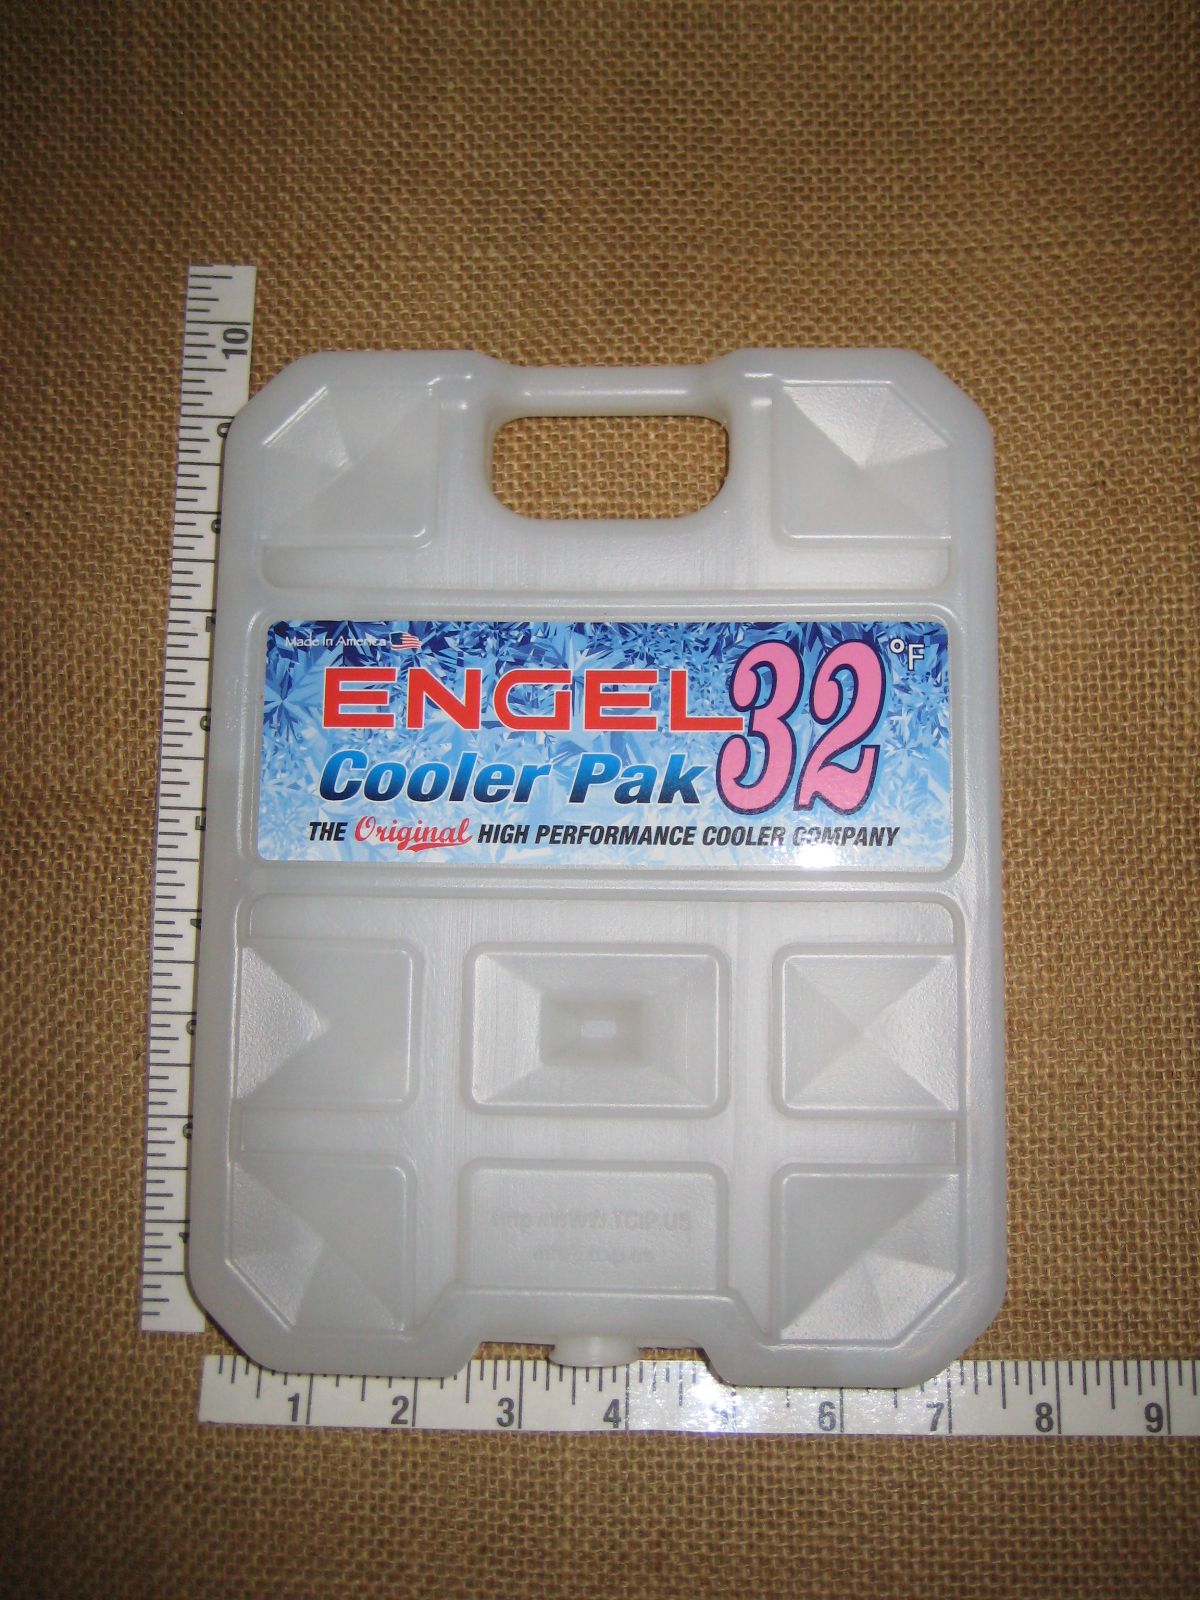 Engel 32 Degree Medium Non Toxic Hard Shell Cooler Pak Ice Gel Cold Pack, 2 Lbs. - image 3 of 3